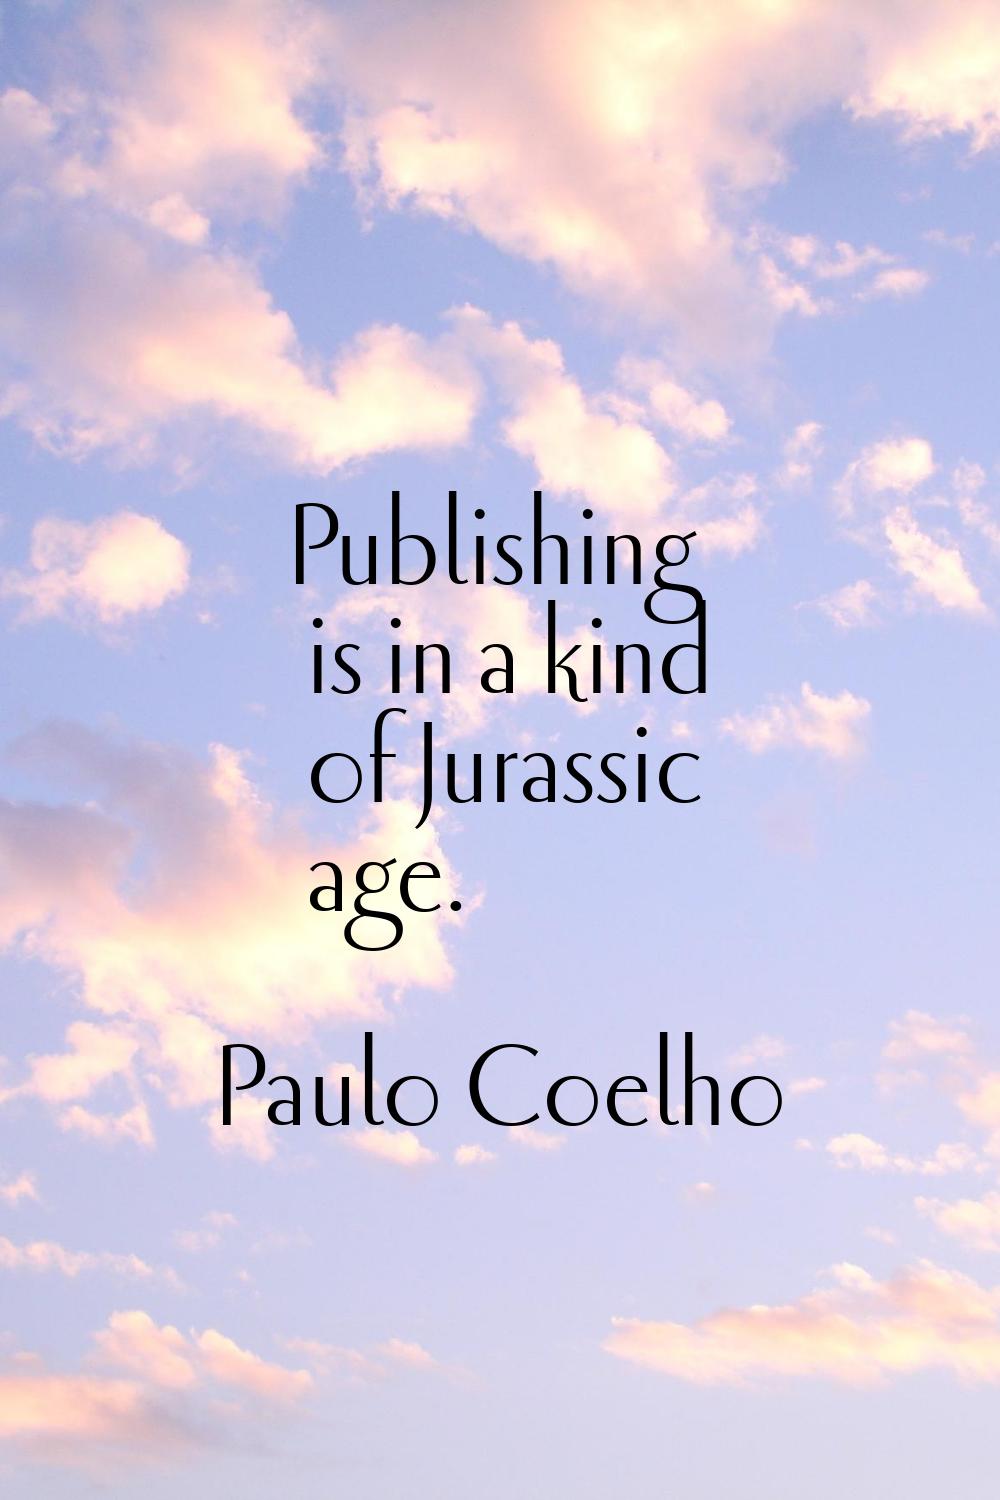 Publishing is in a kind of Jurassic age.